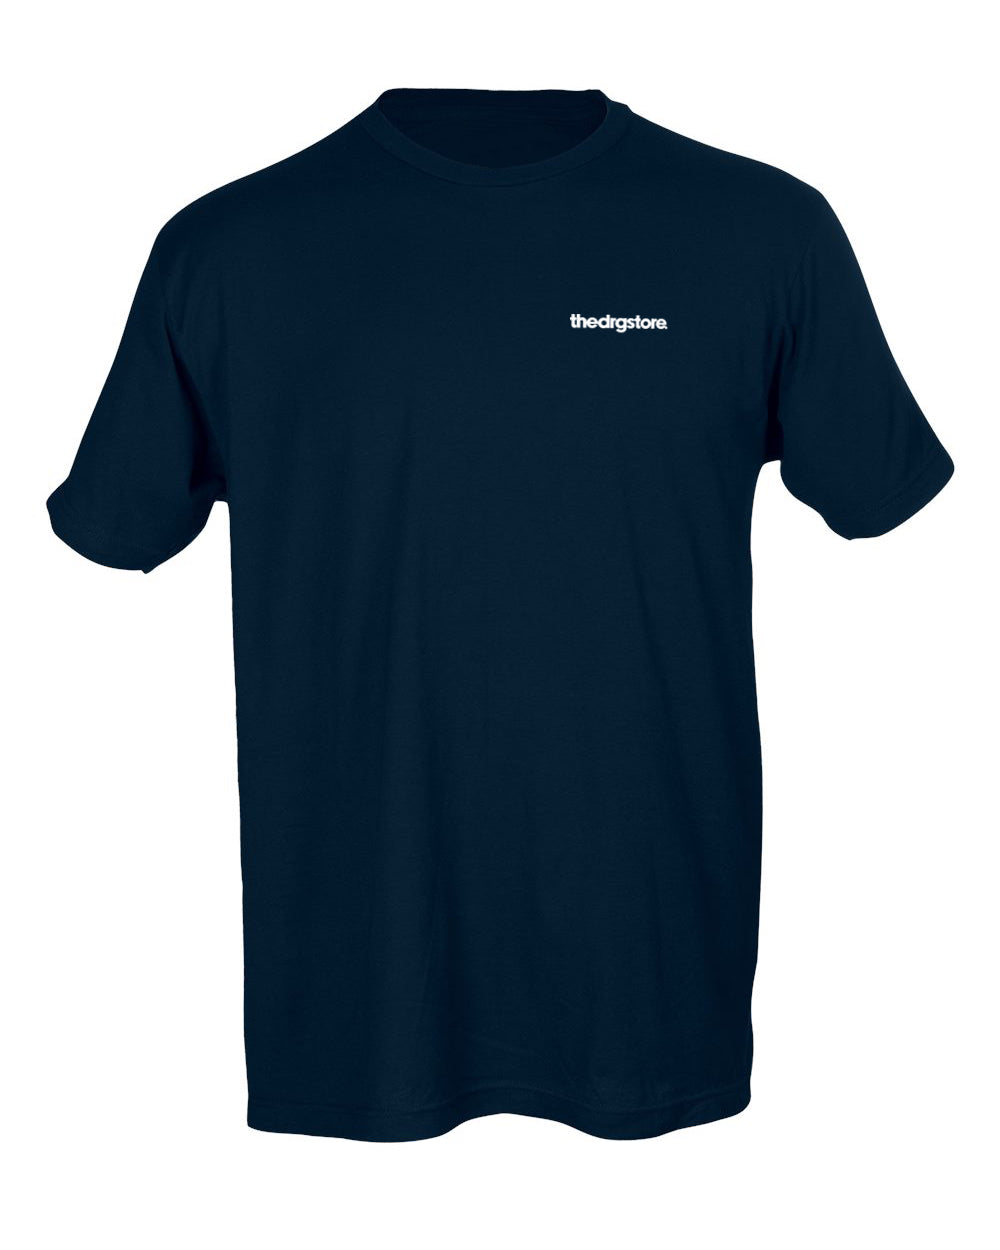 thedrgstore branded navy t-shirt